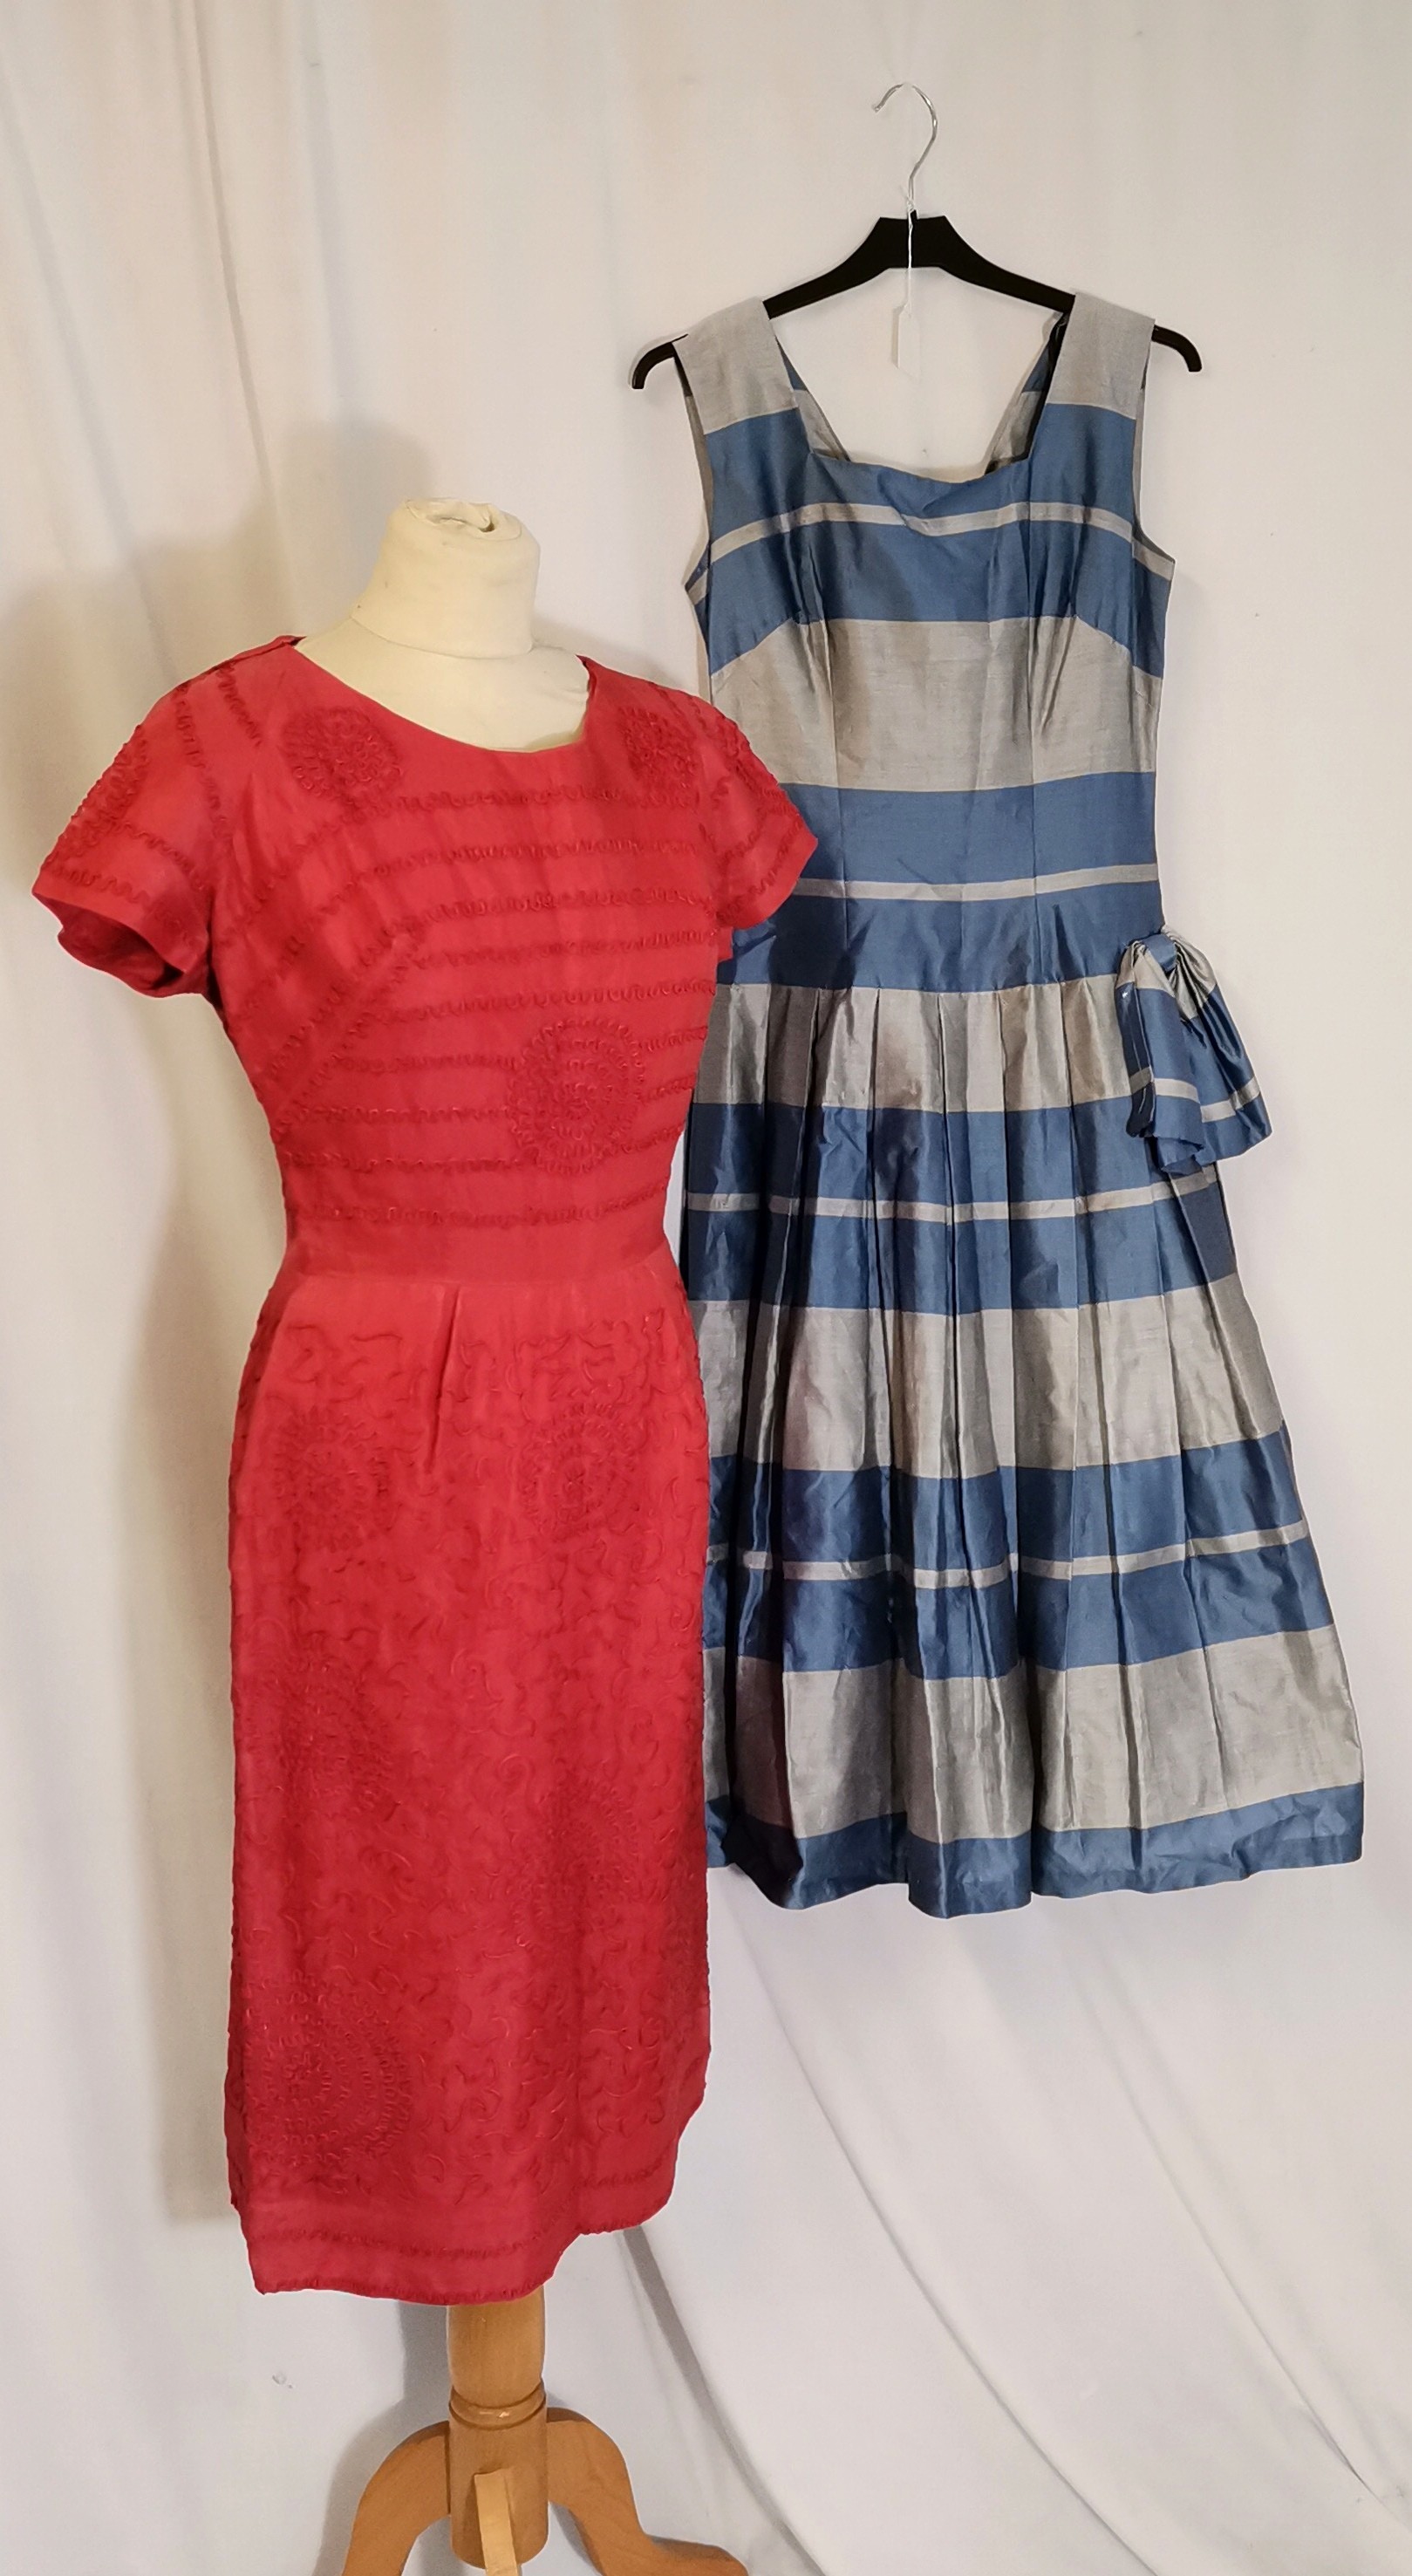 2 1950s dresses 1 blue and grey taffeta with bow at waist t/w coral chiffon with overlay pattern